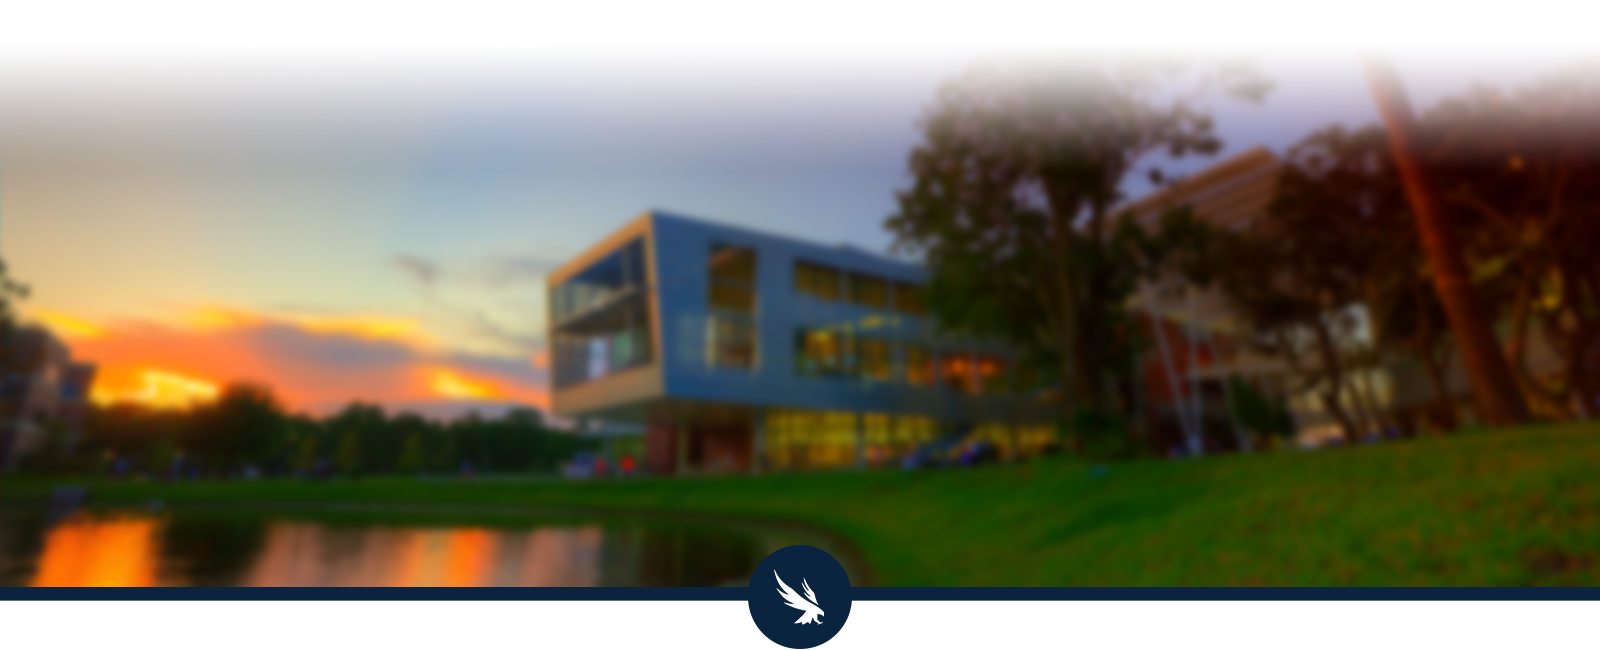 Blurred Image of UNF Campus